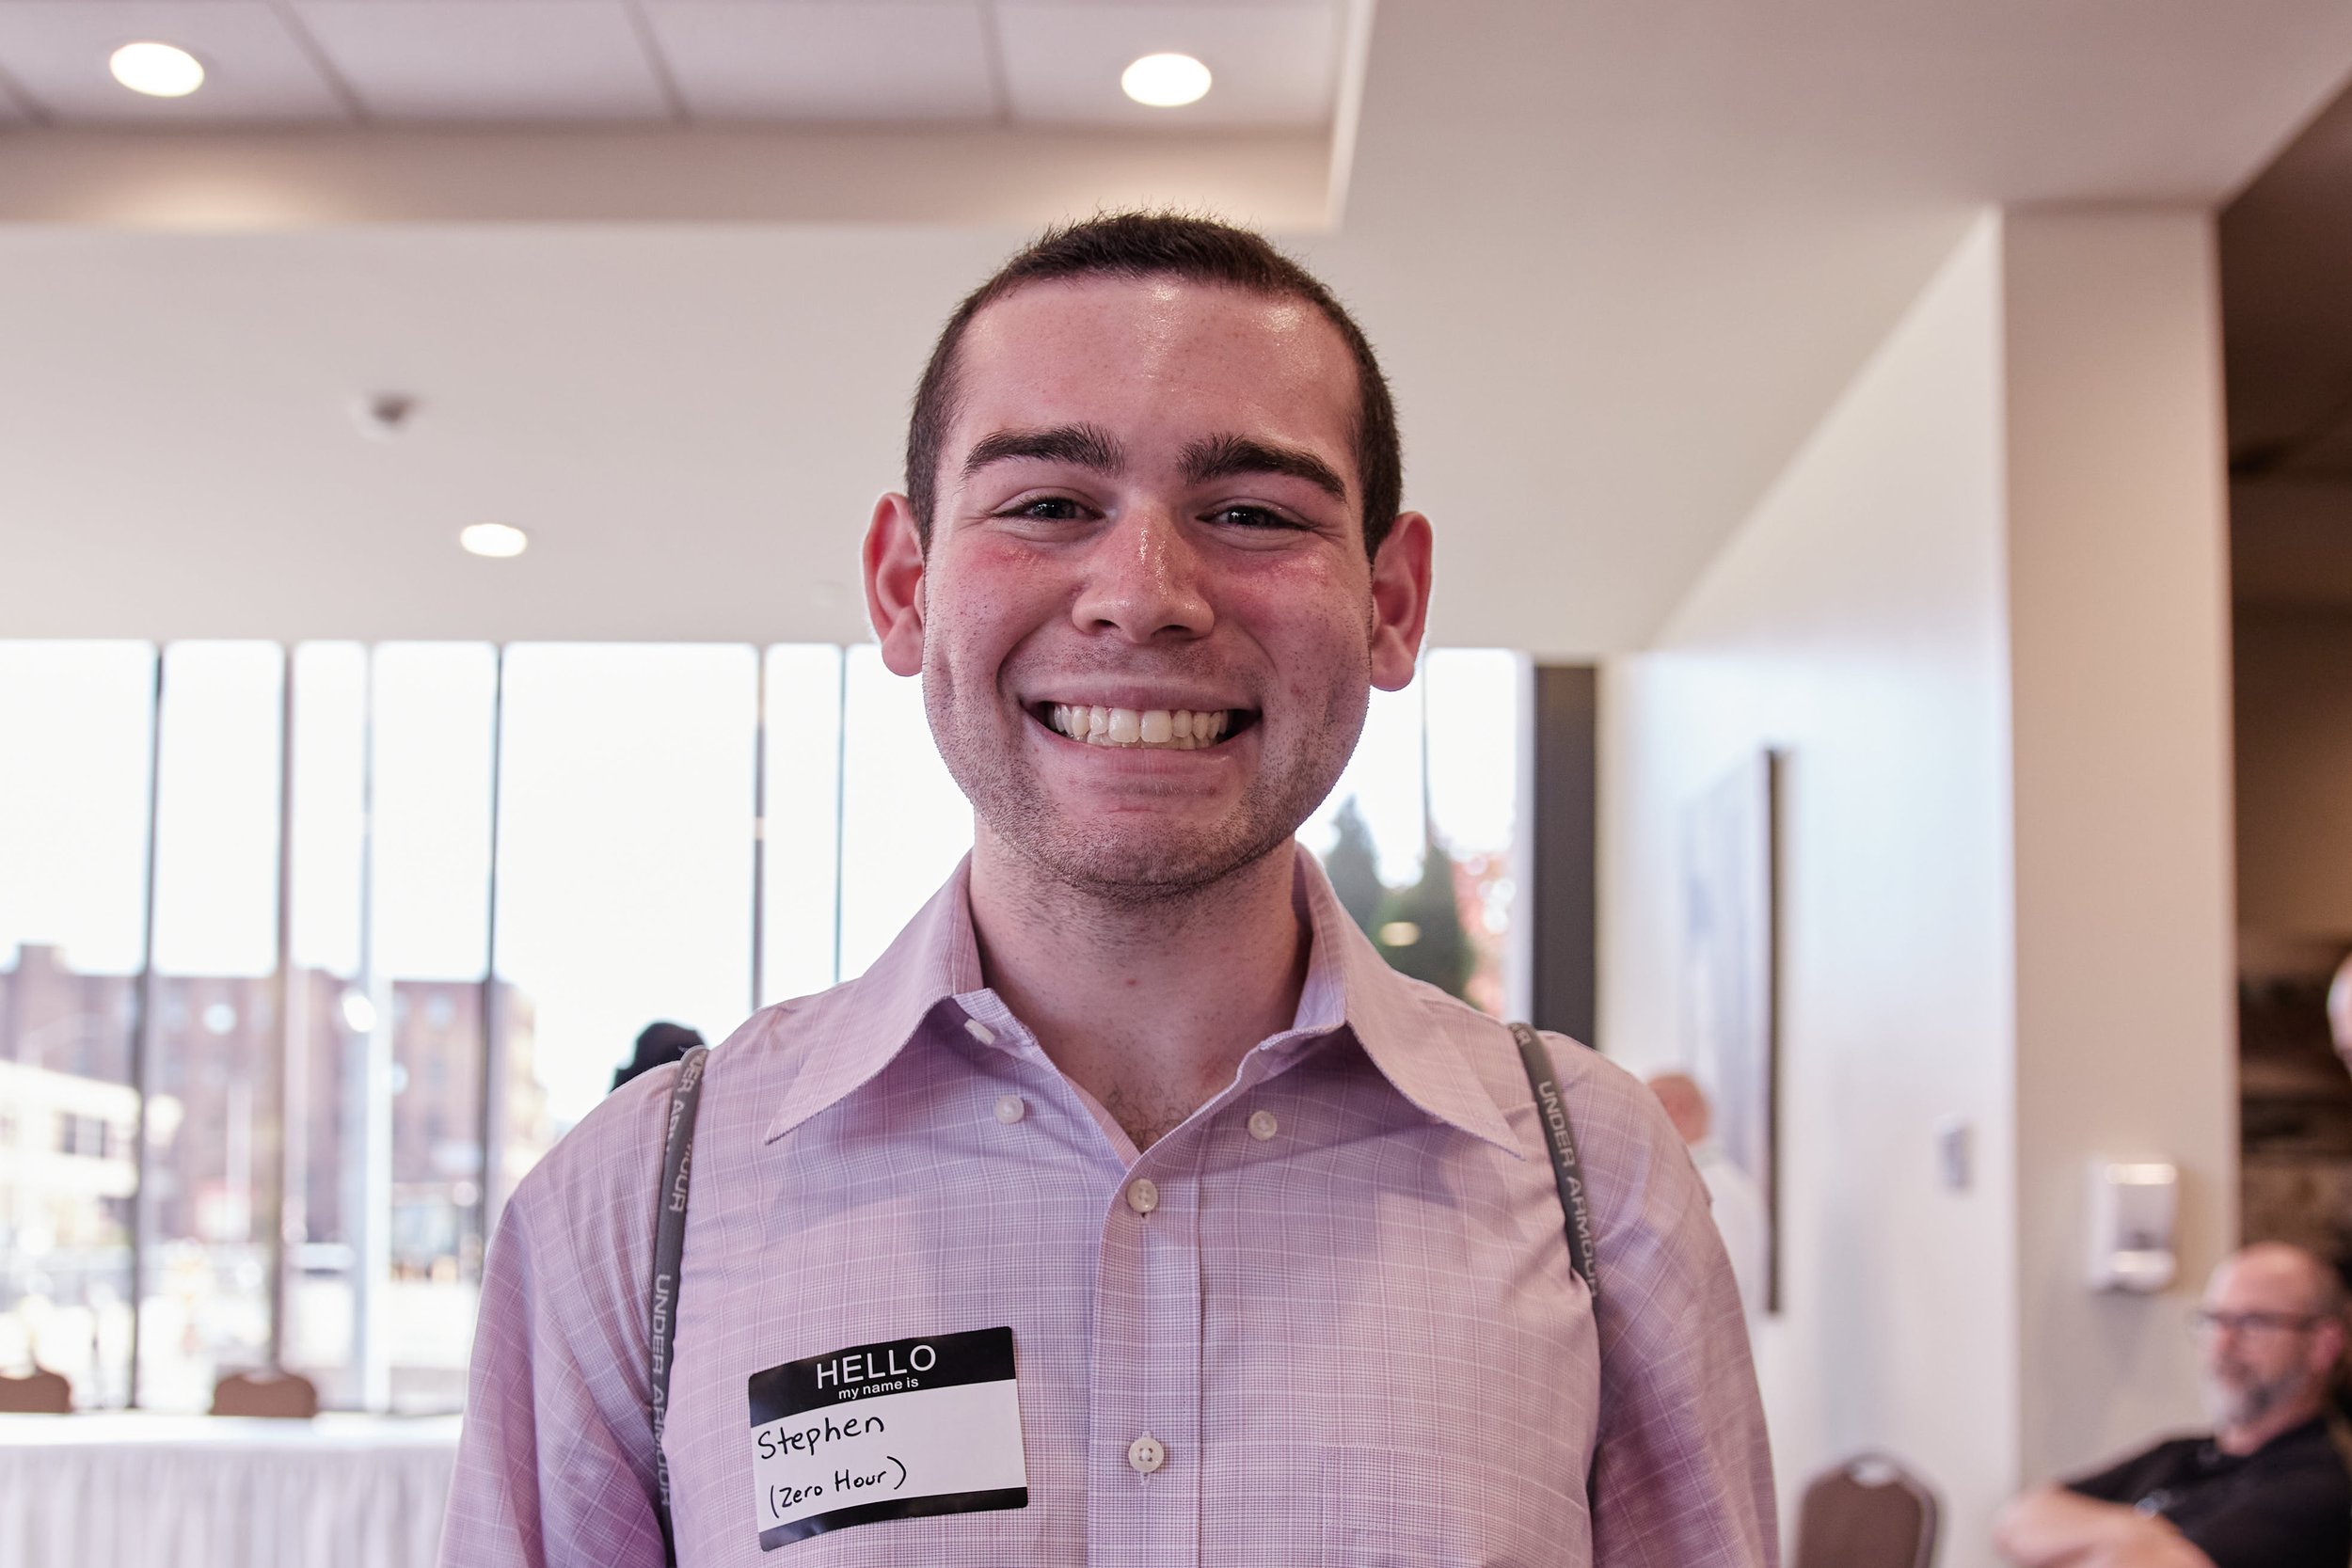    “I came to the summit today to learn just how extensive the clean energy field is… I really take an interest in environmental planning.”     - Steven, Senior at Binghamton University  